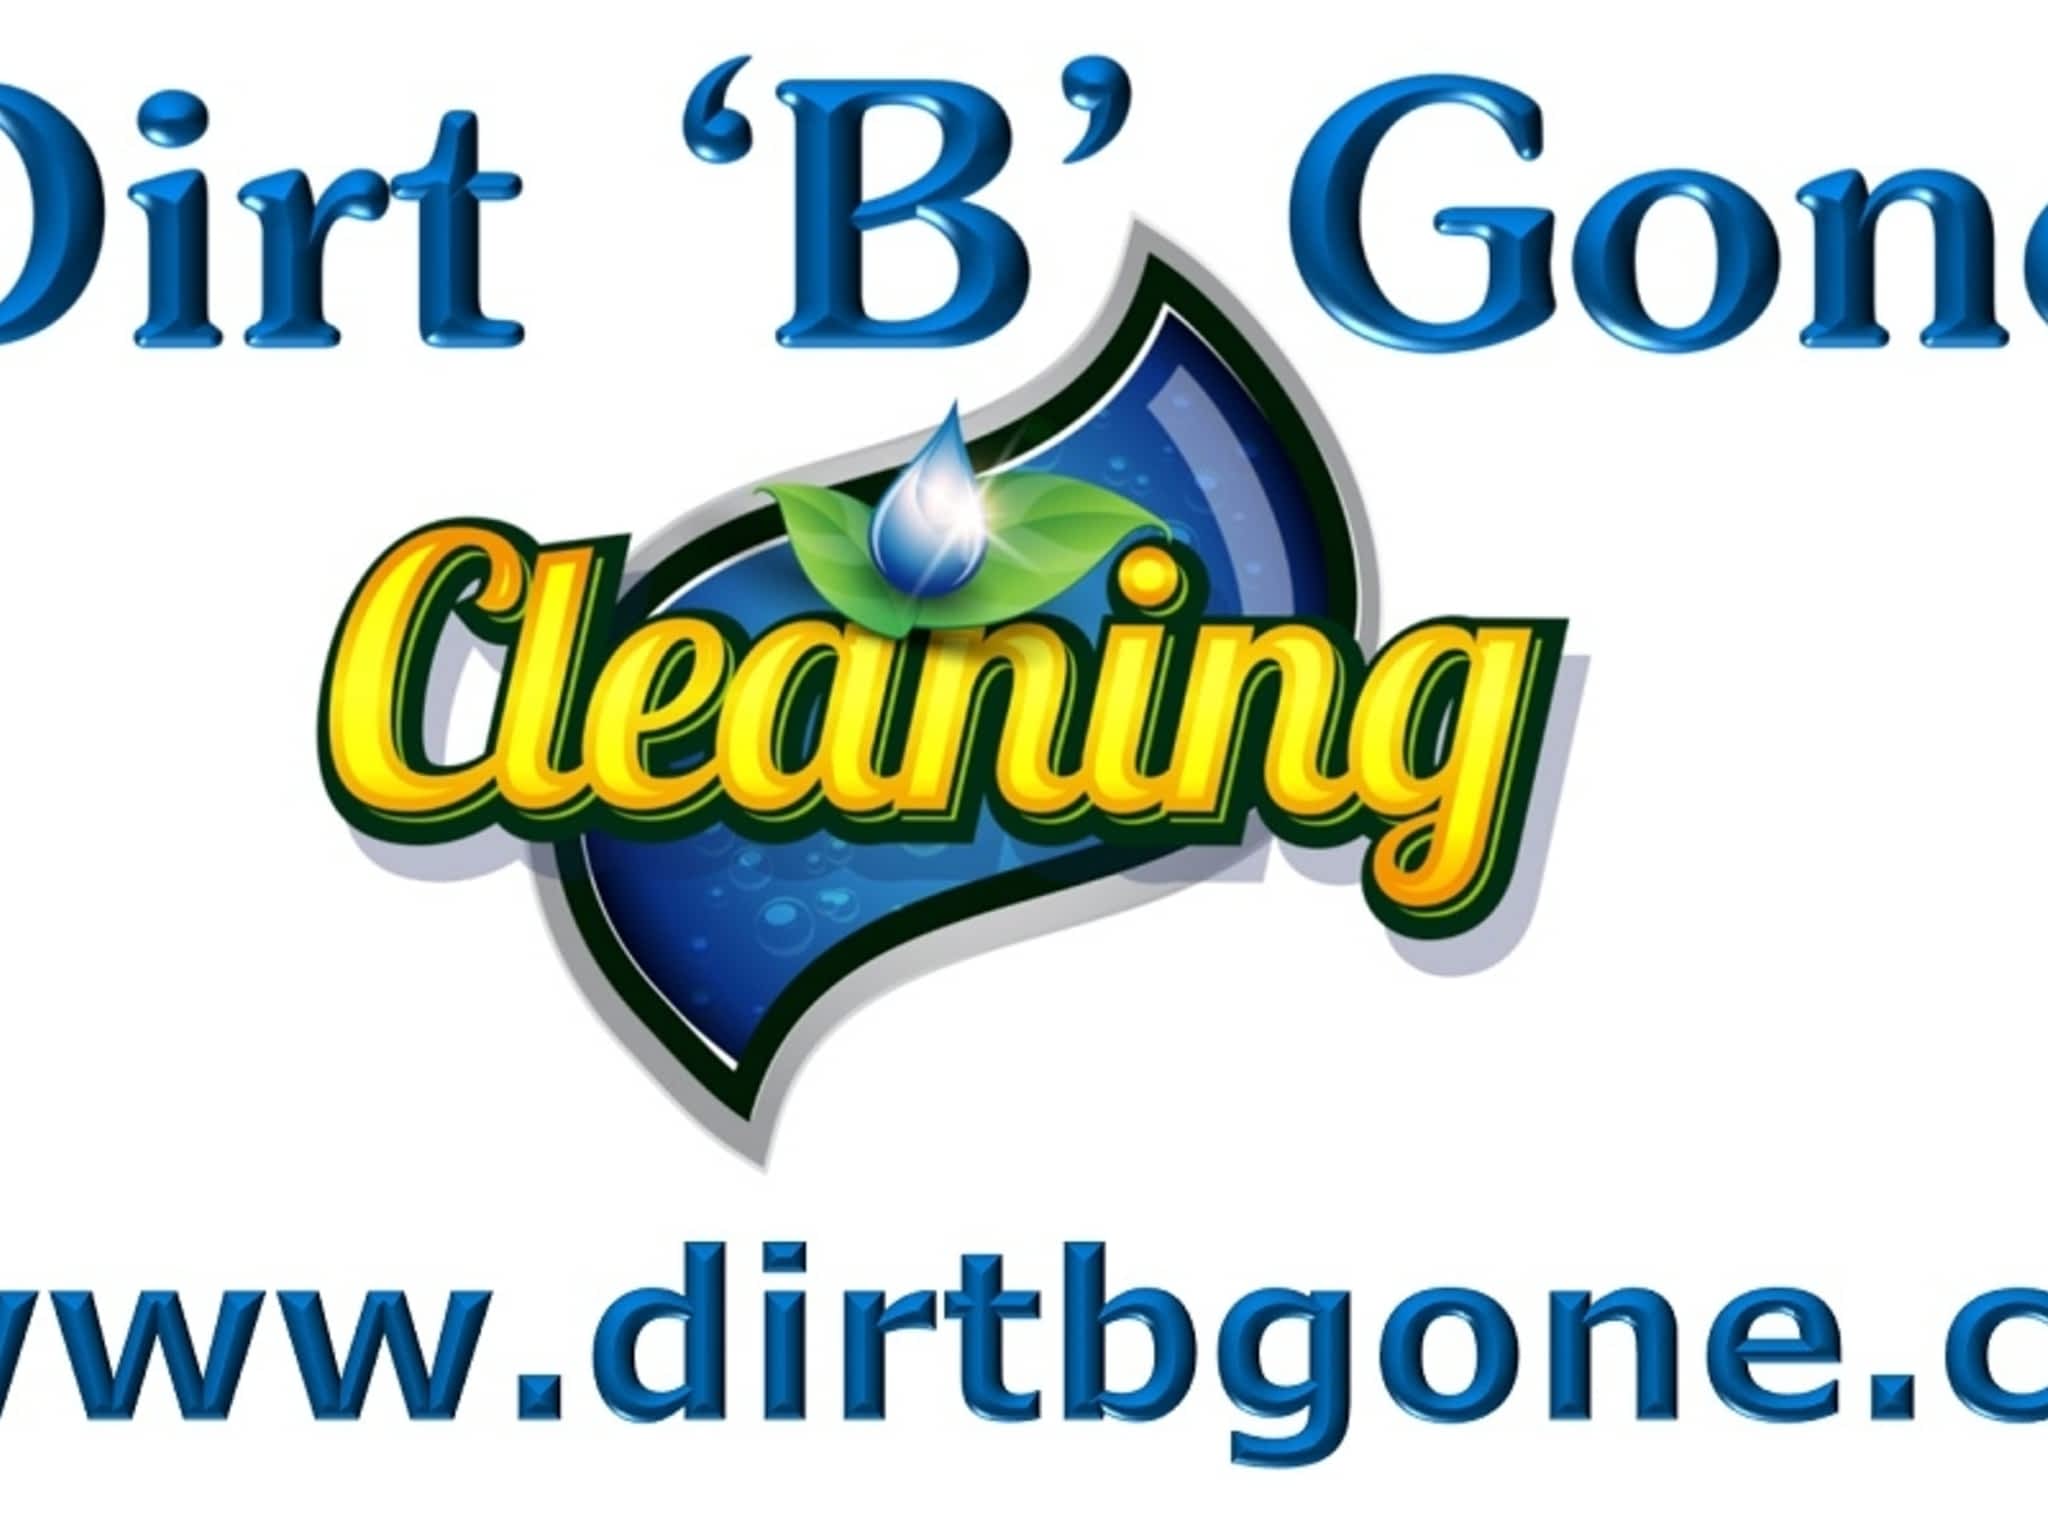 photo Dirt 'B' Gone Cleaning